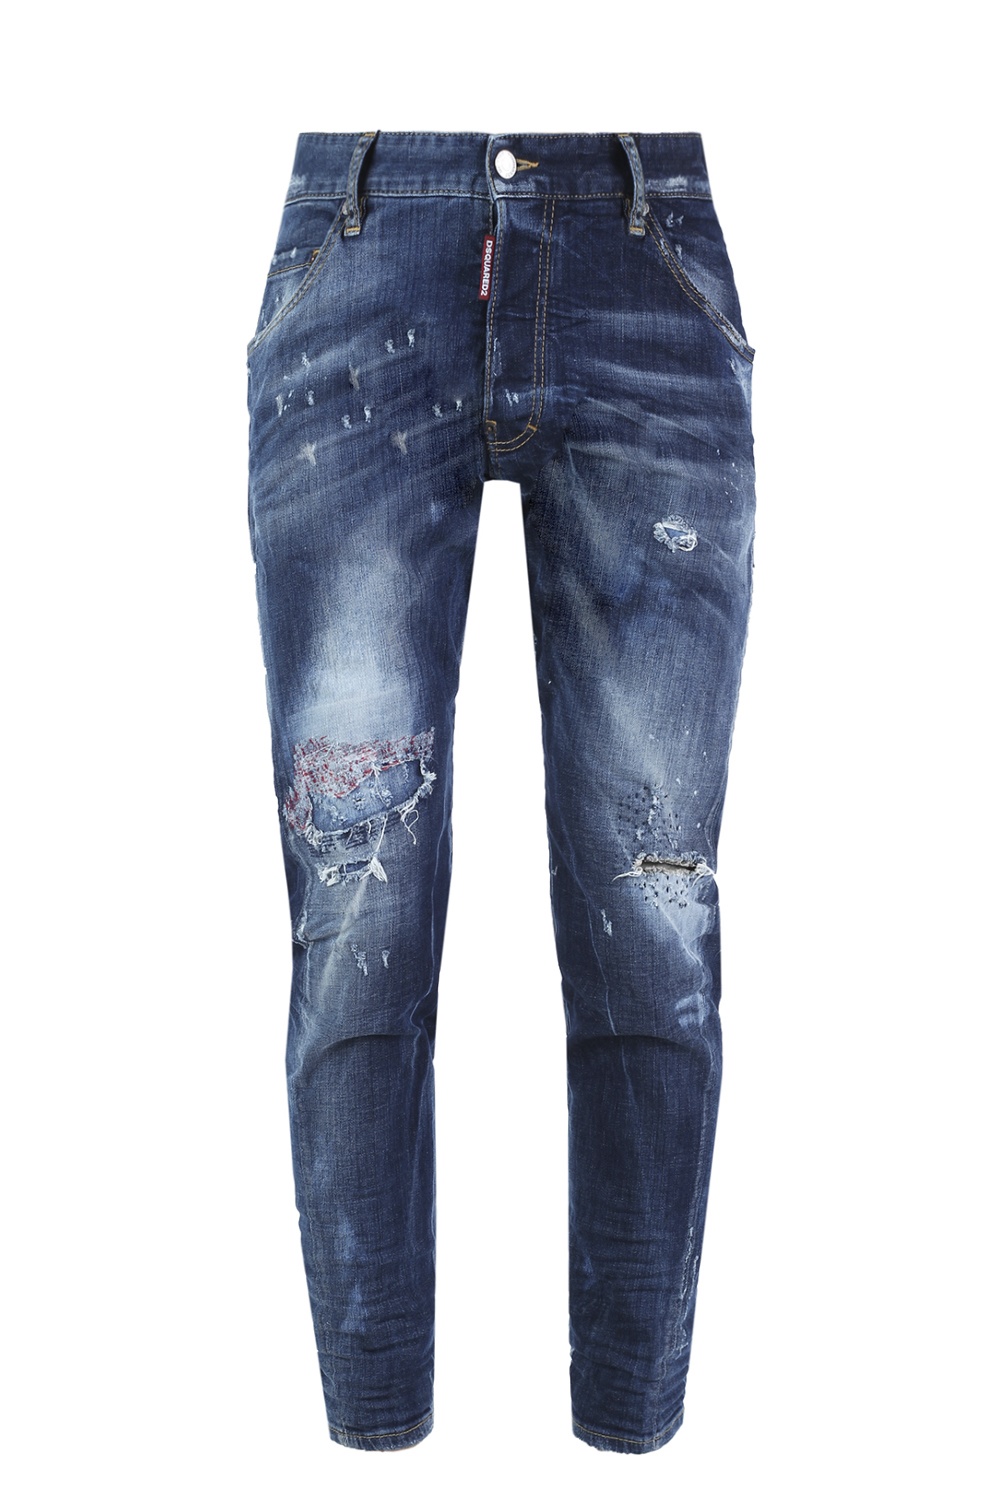 dsquared2 classic kenny jean